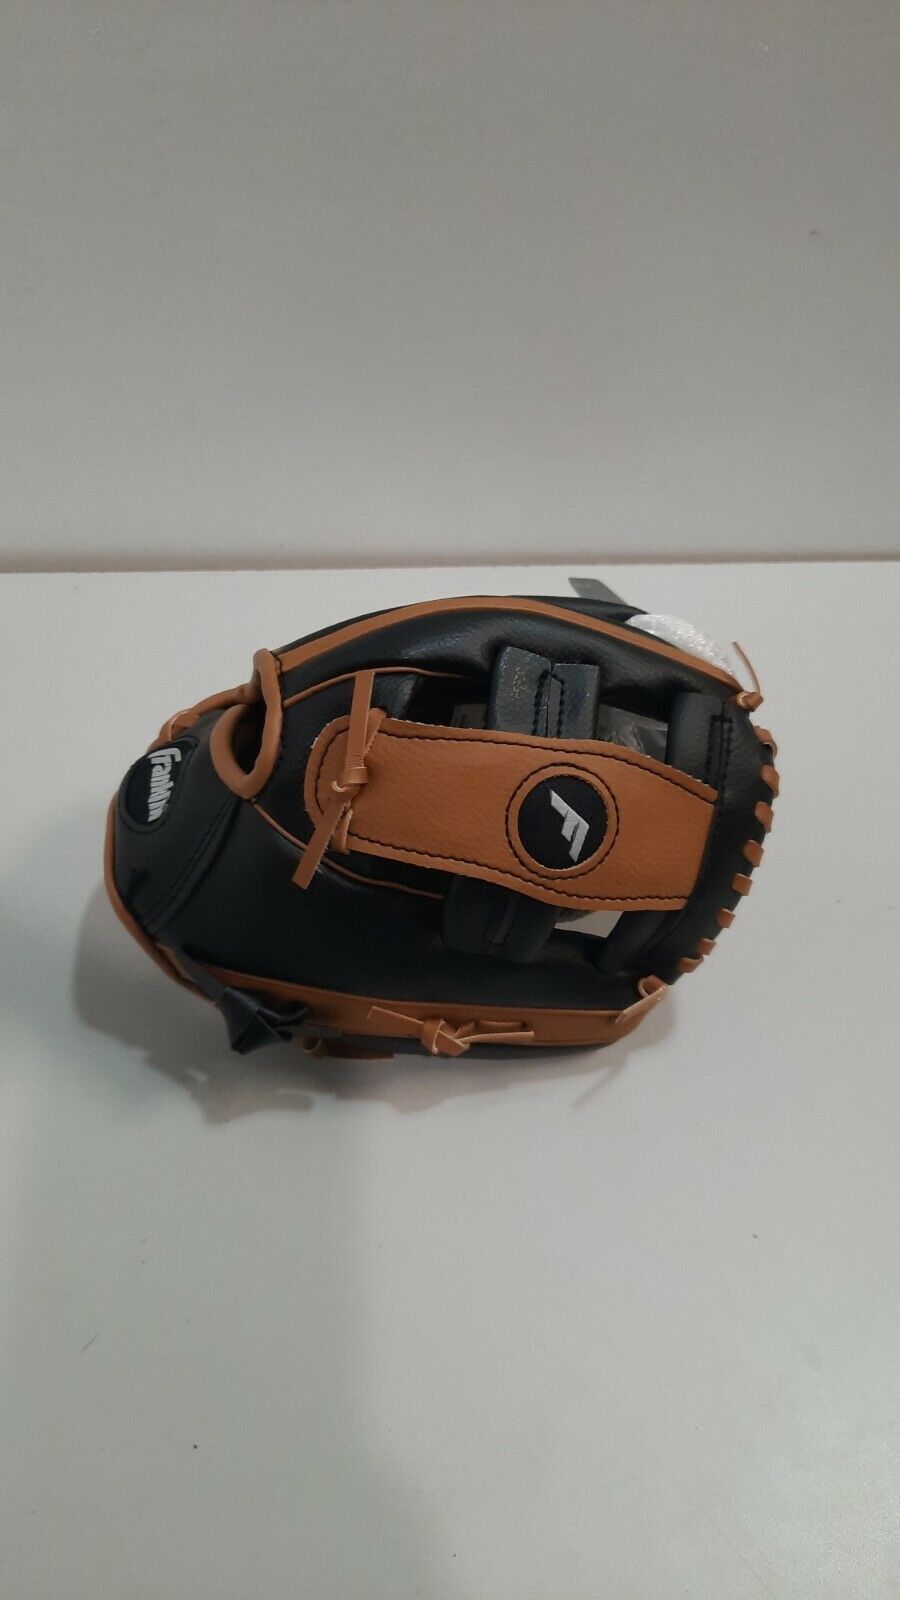 Franklin Ready to Play Fielding Baseball Mitt size 9.5 In left hand right hand throwing with practice ball NEW